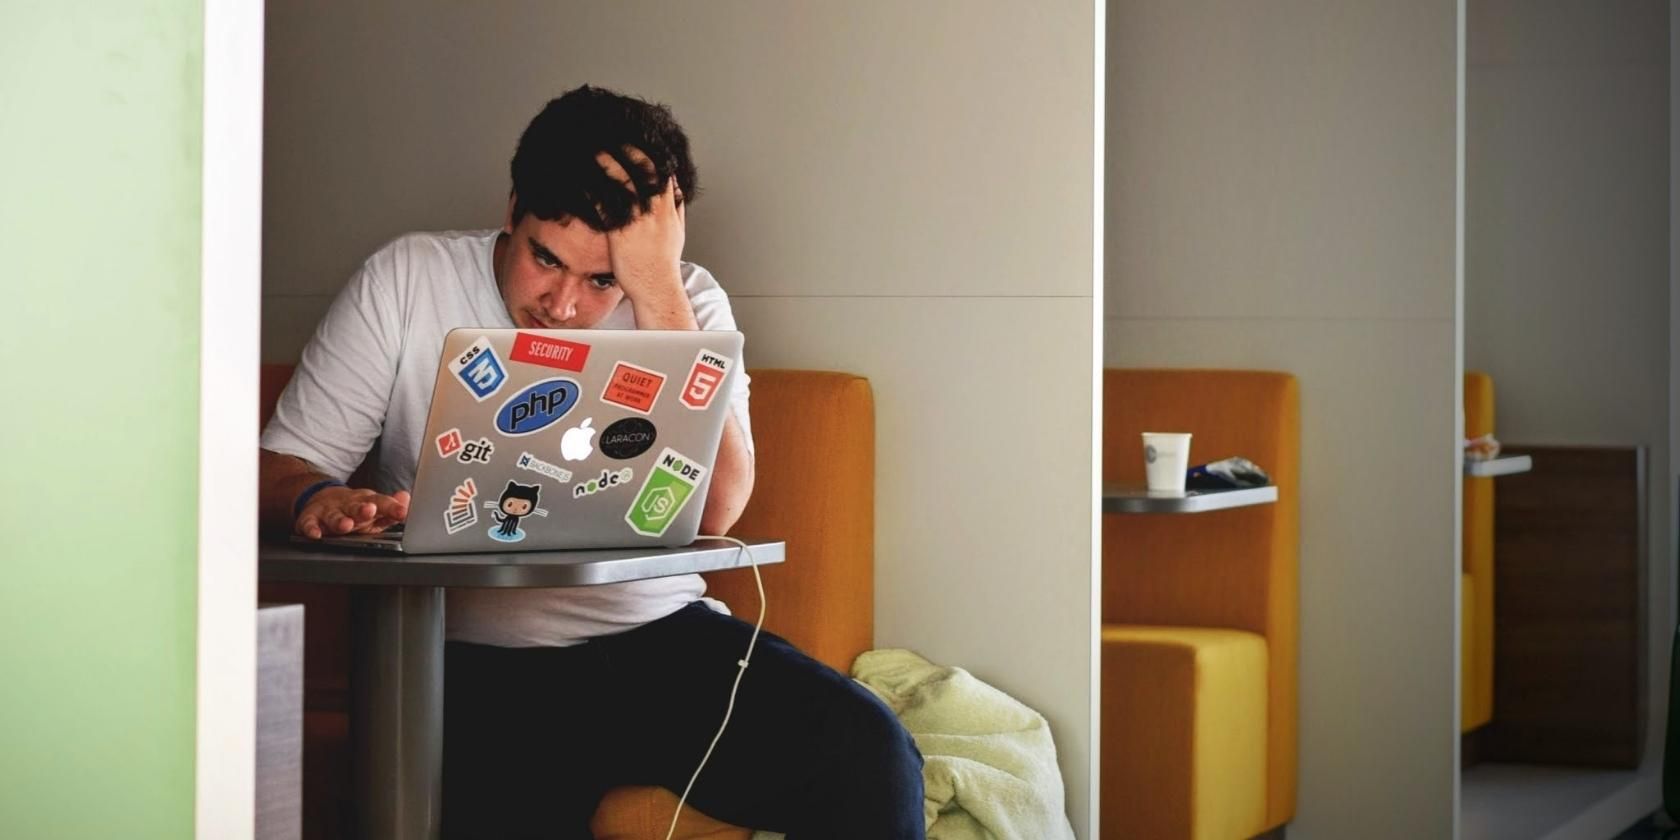 Man Looking Frustrated While Looking on Mac